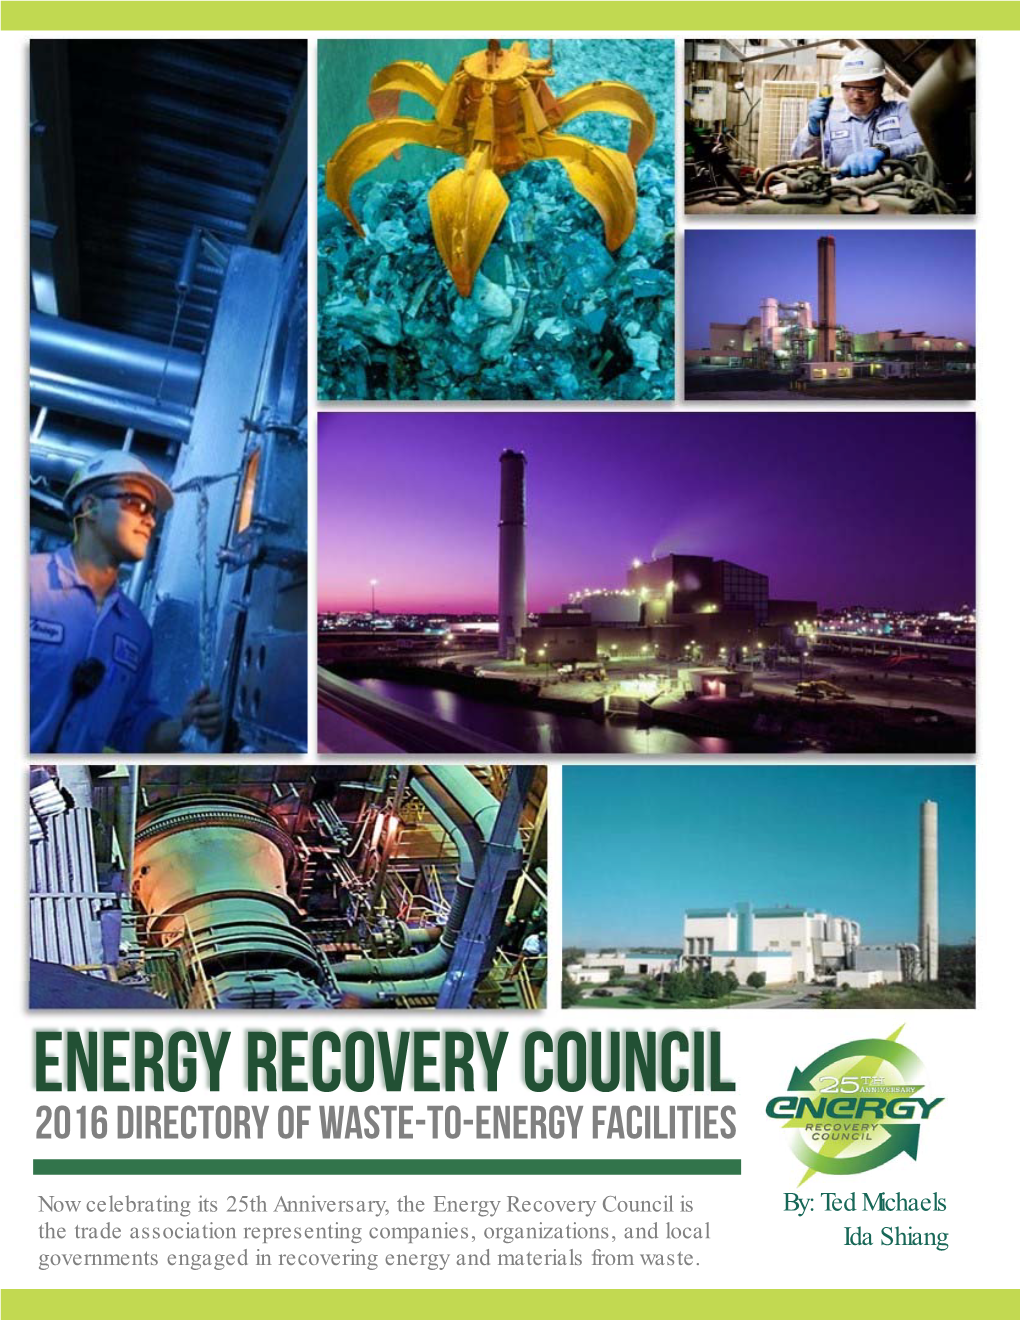 Energy Recovery Council 2016 Directory of Waste-To-Energy Facilities